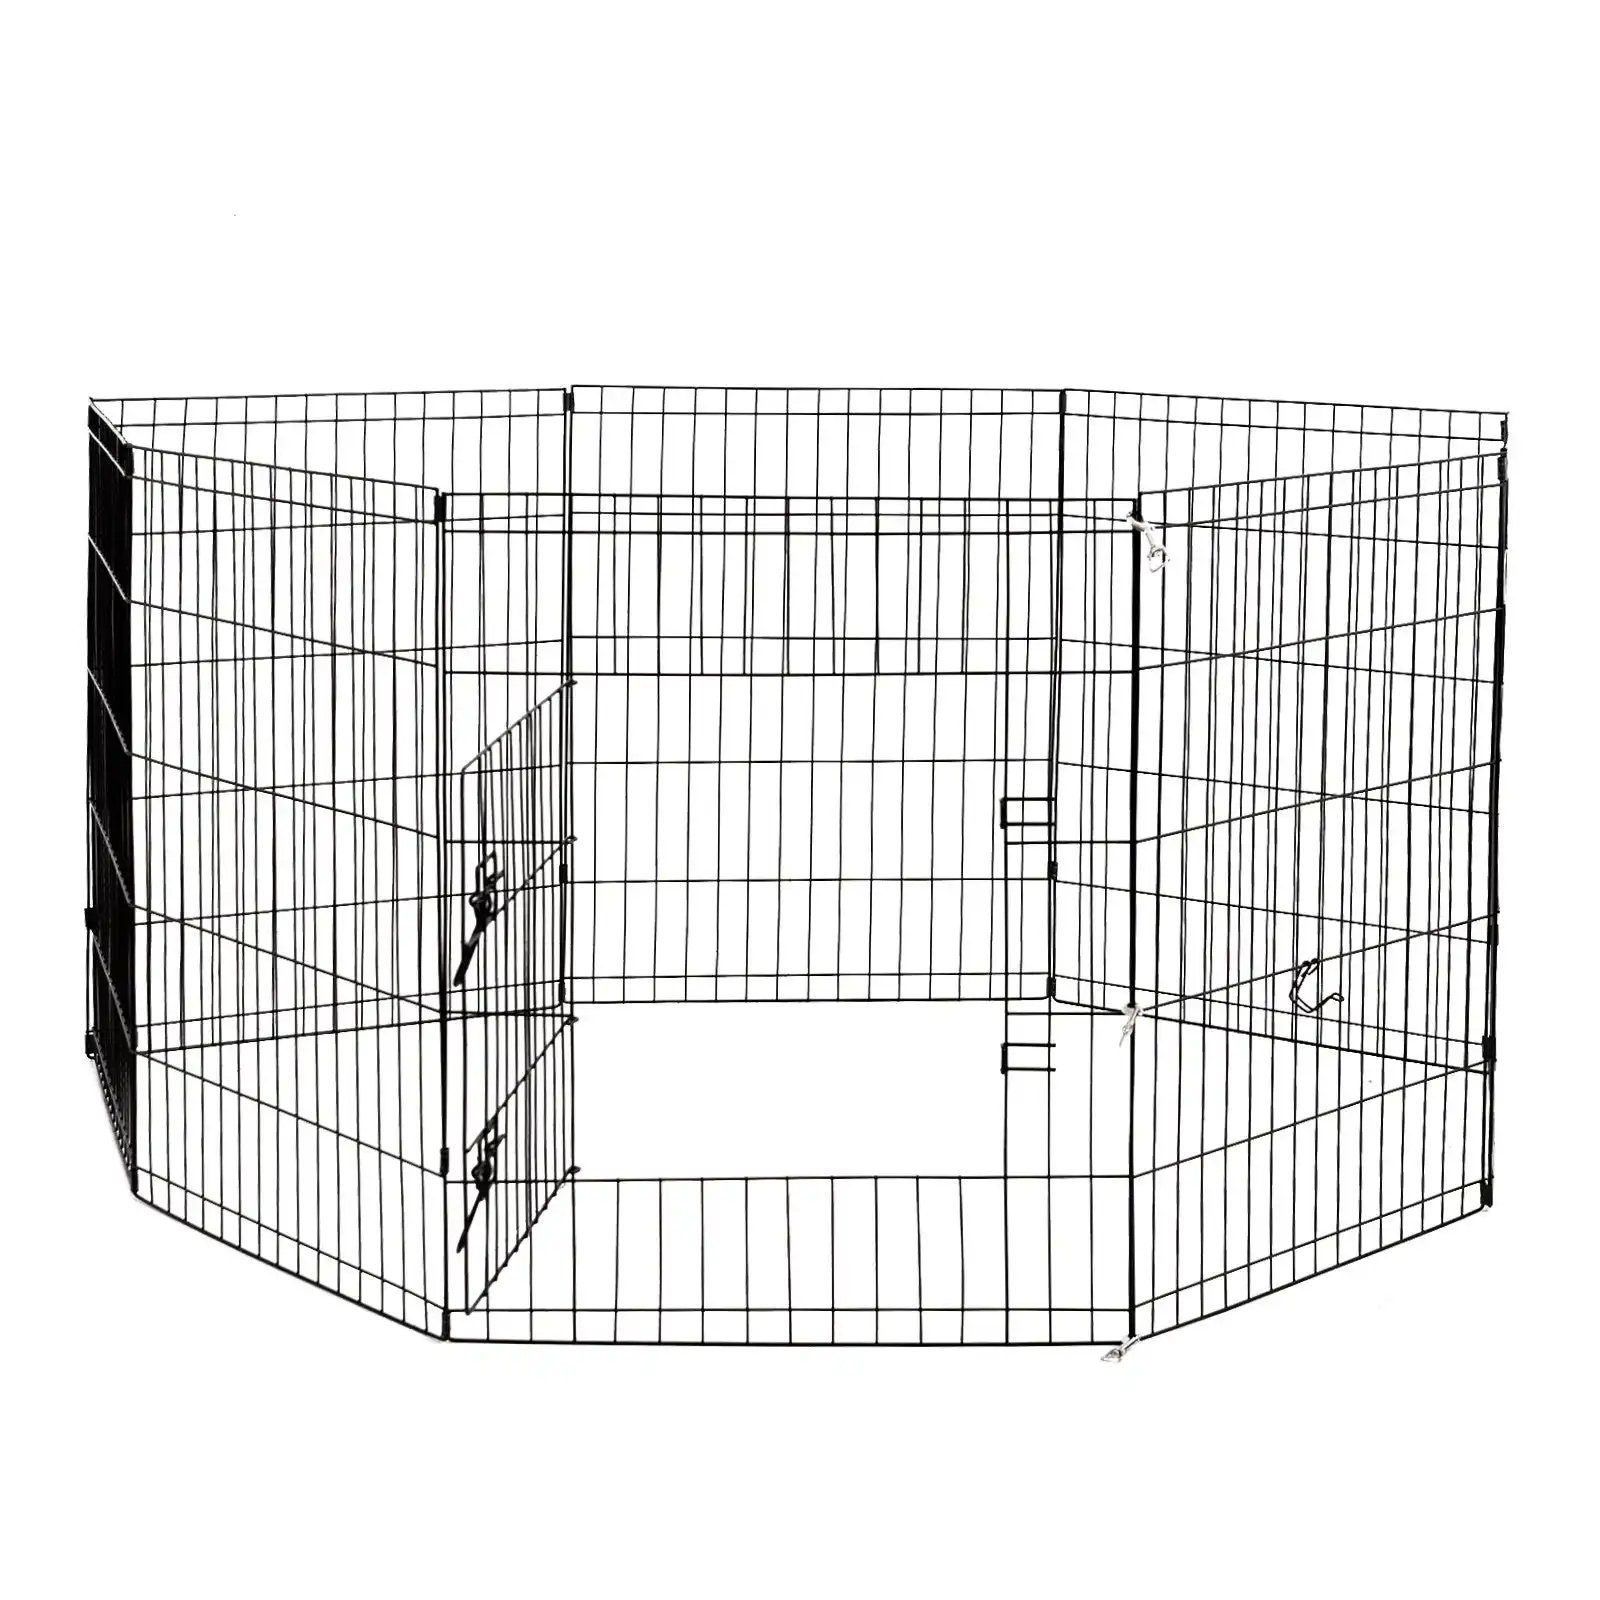 4Paws 8 Panel Playpen Puppy Exercise Fence Cage Enclosure Pets Black All Sizes